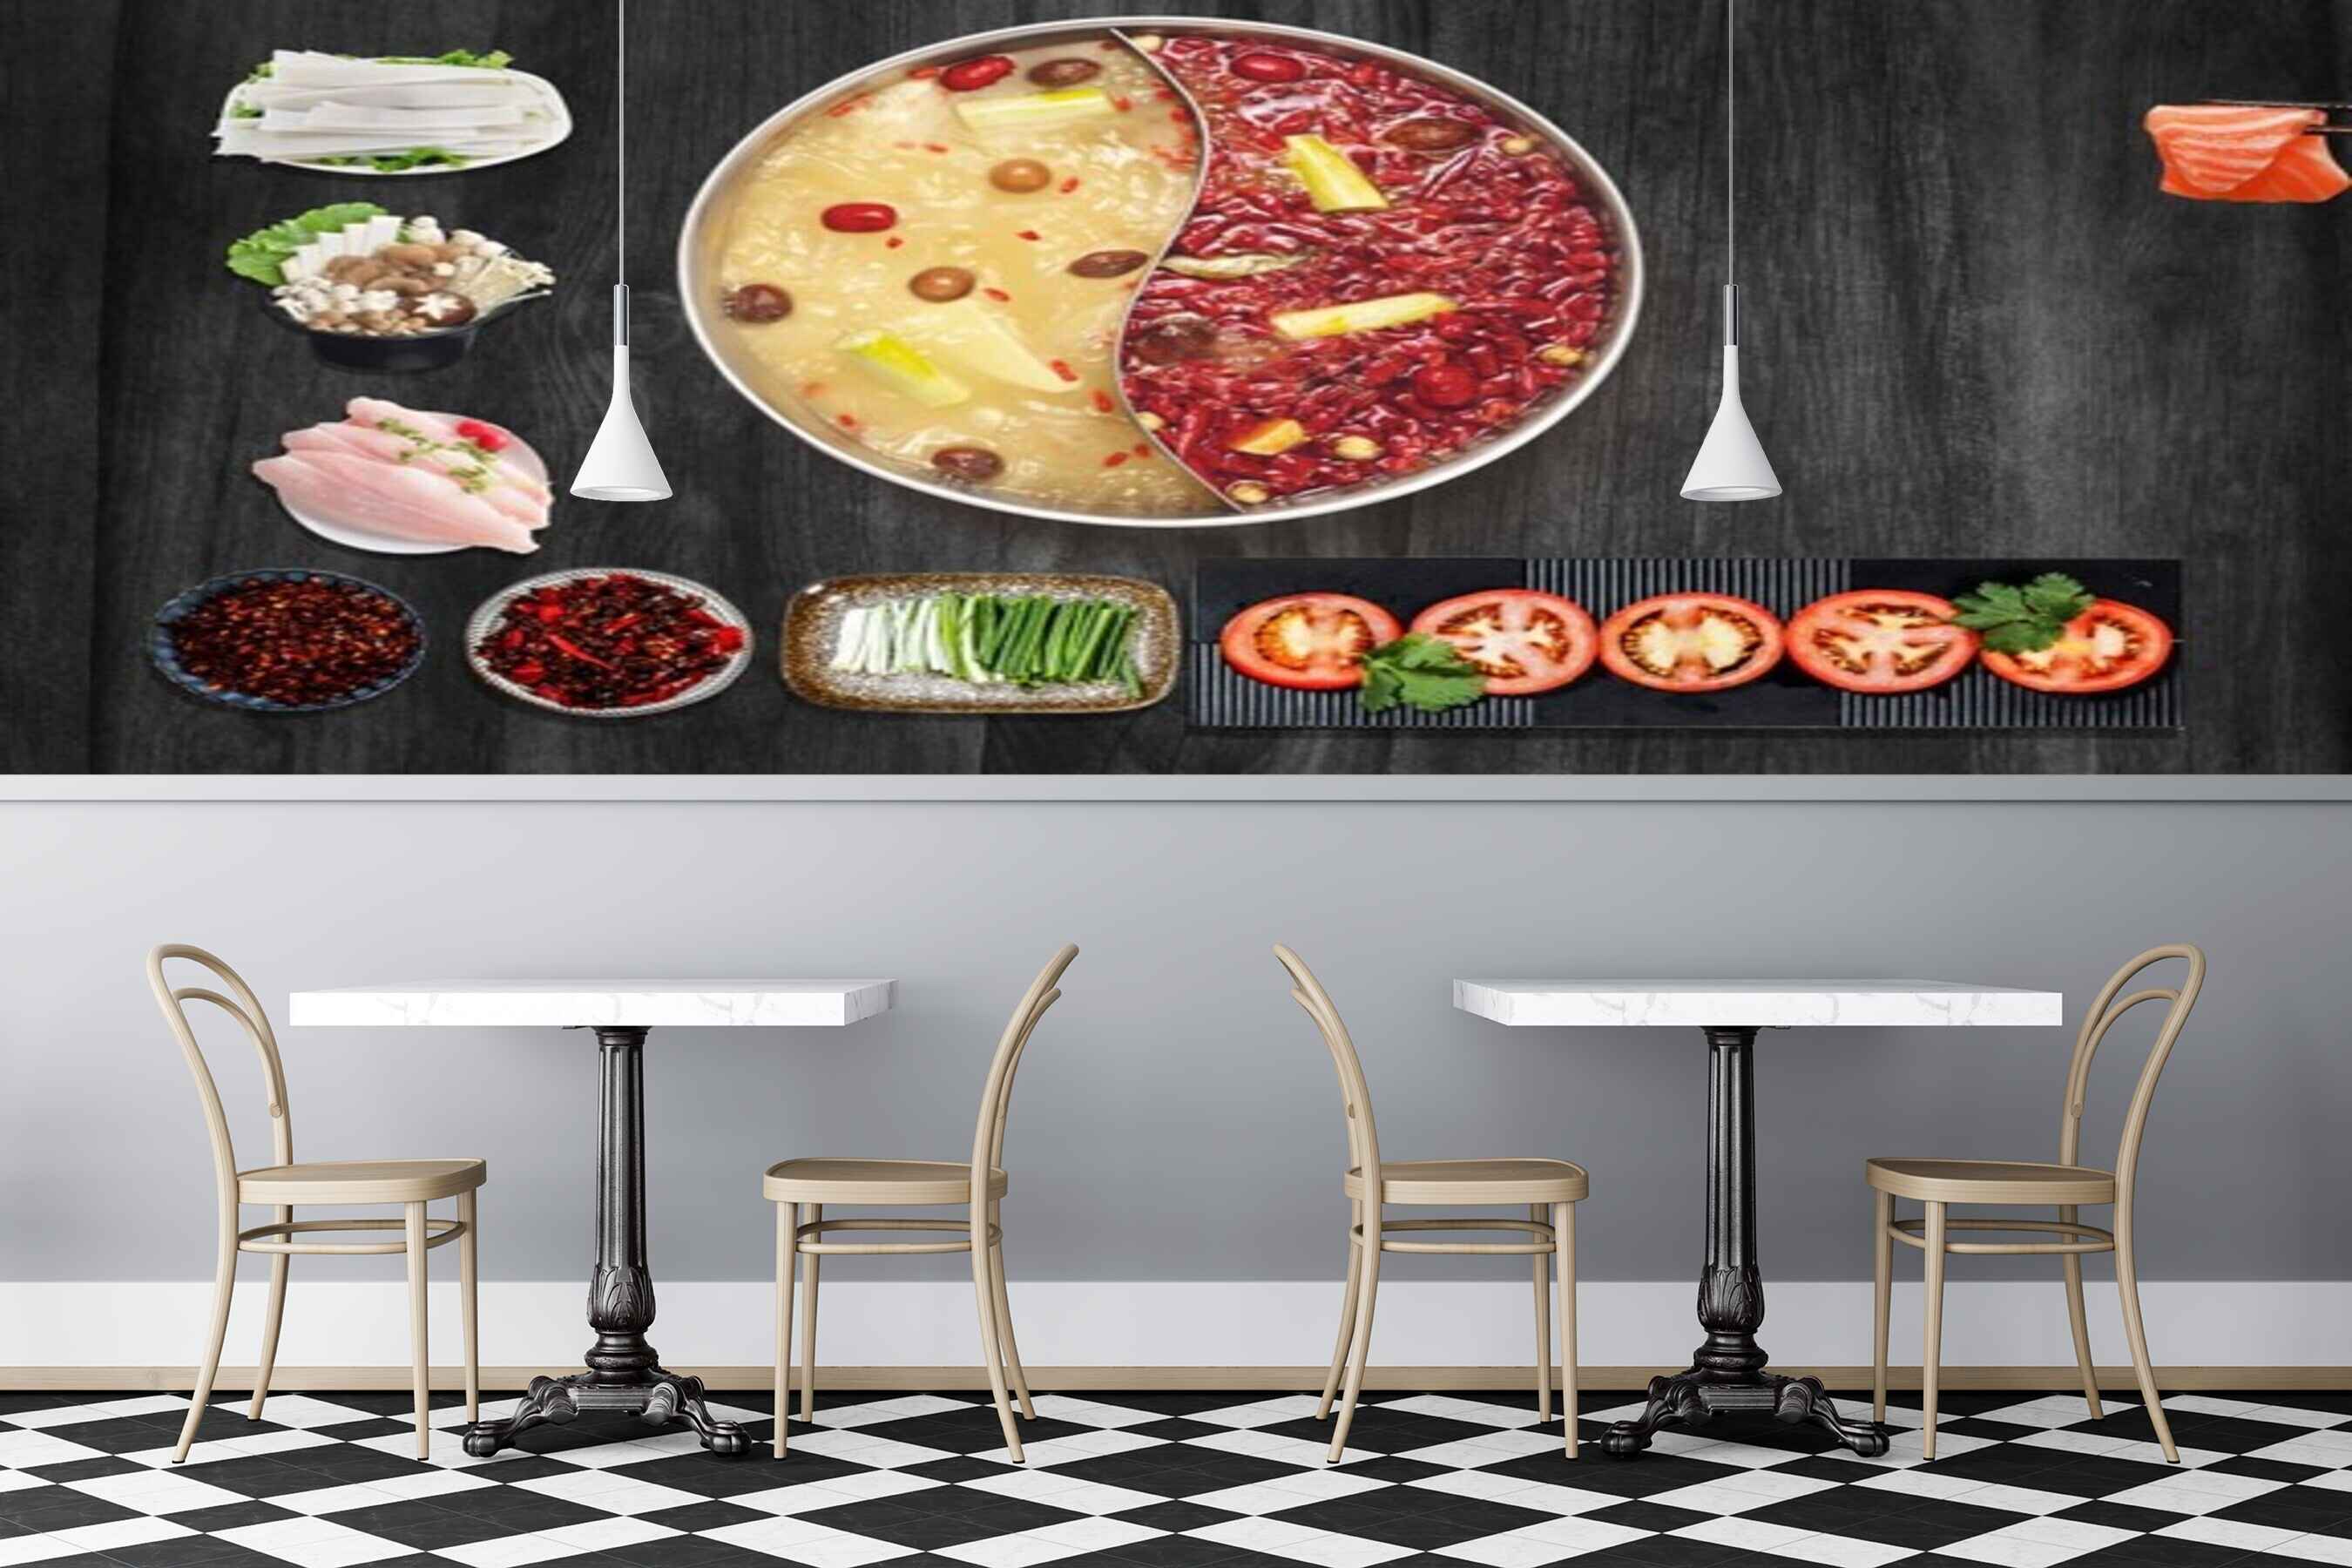 Avikalp MWZ3153 Hot Pot Tomatoes Meat Spices HD Wallpaper for Cafe Restaurant